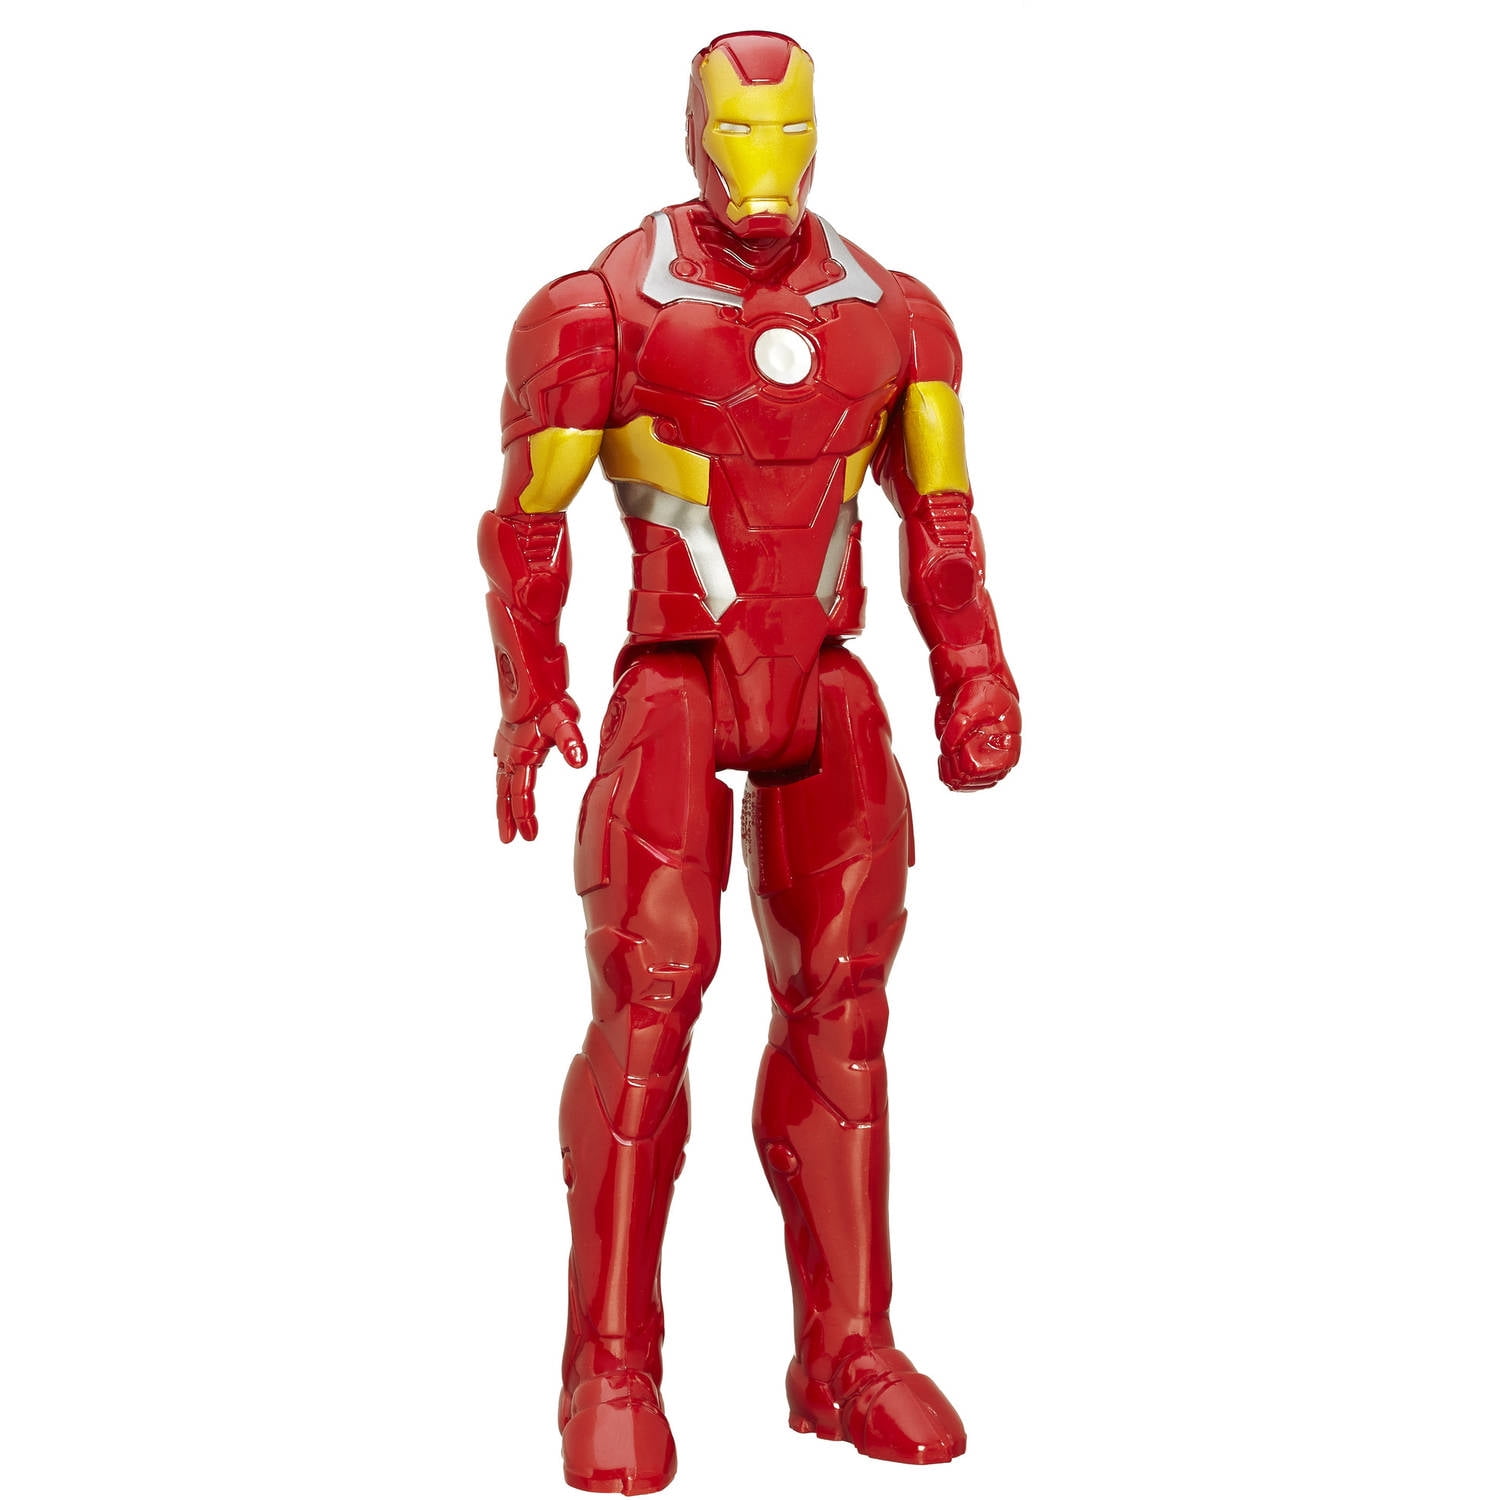 Marvel Legends Avengers Iron Man 12 Inch Action Figure New Fast & Free Delivery 